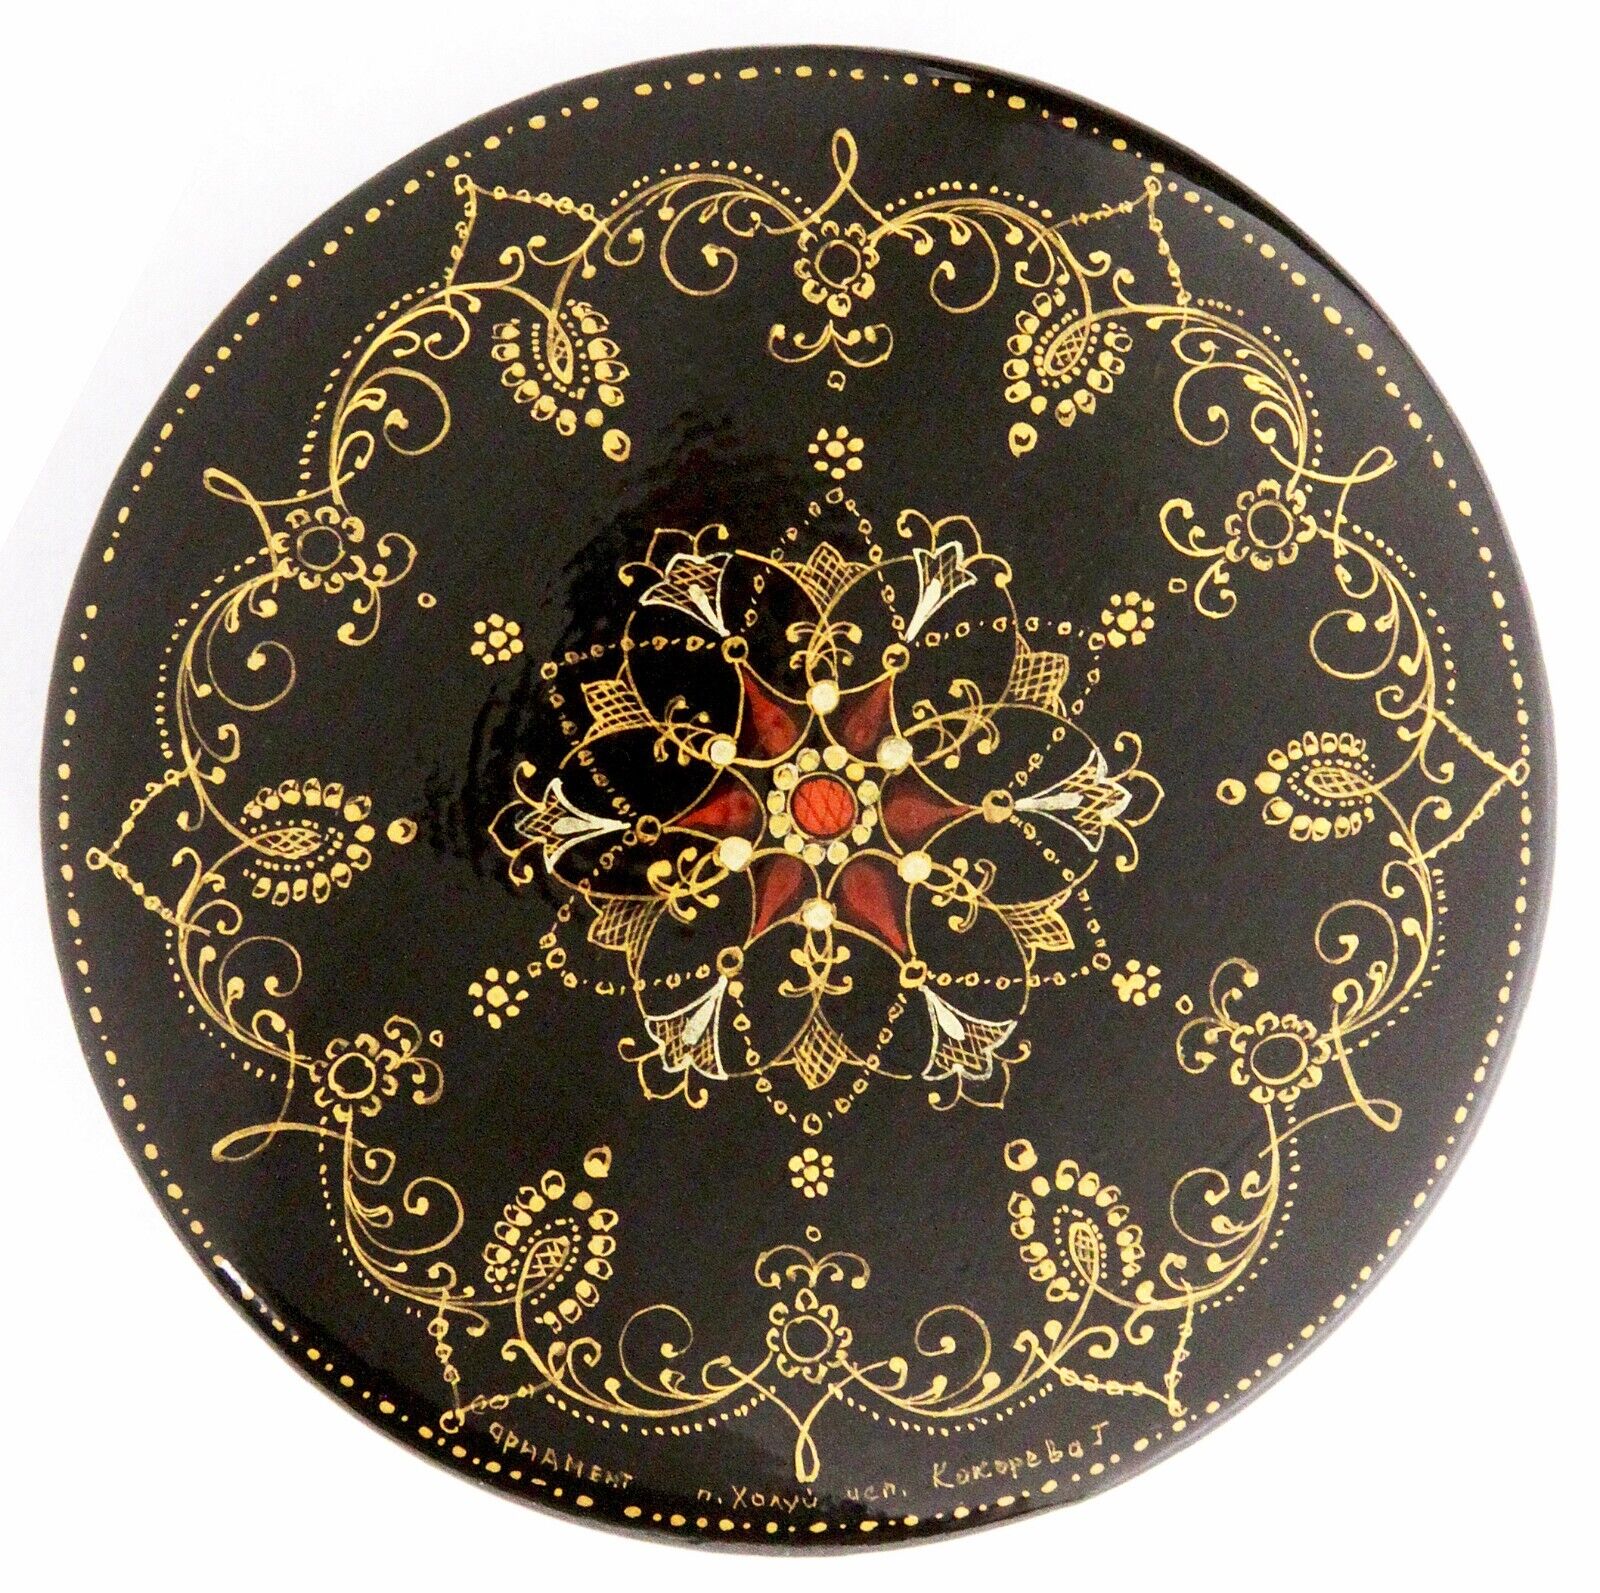 Vintage Signed Round Hand Painted Russian Lacquer Wooden Box Trinket Stamp Box